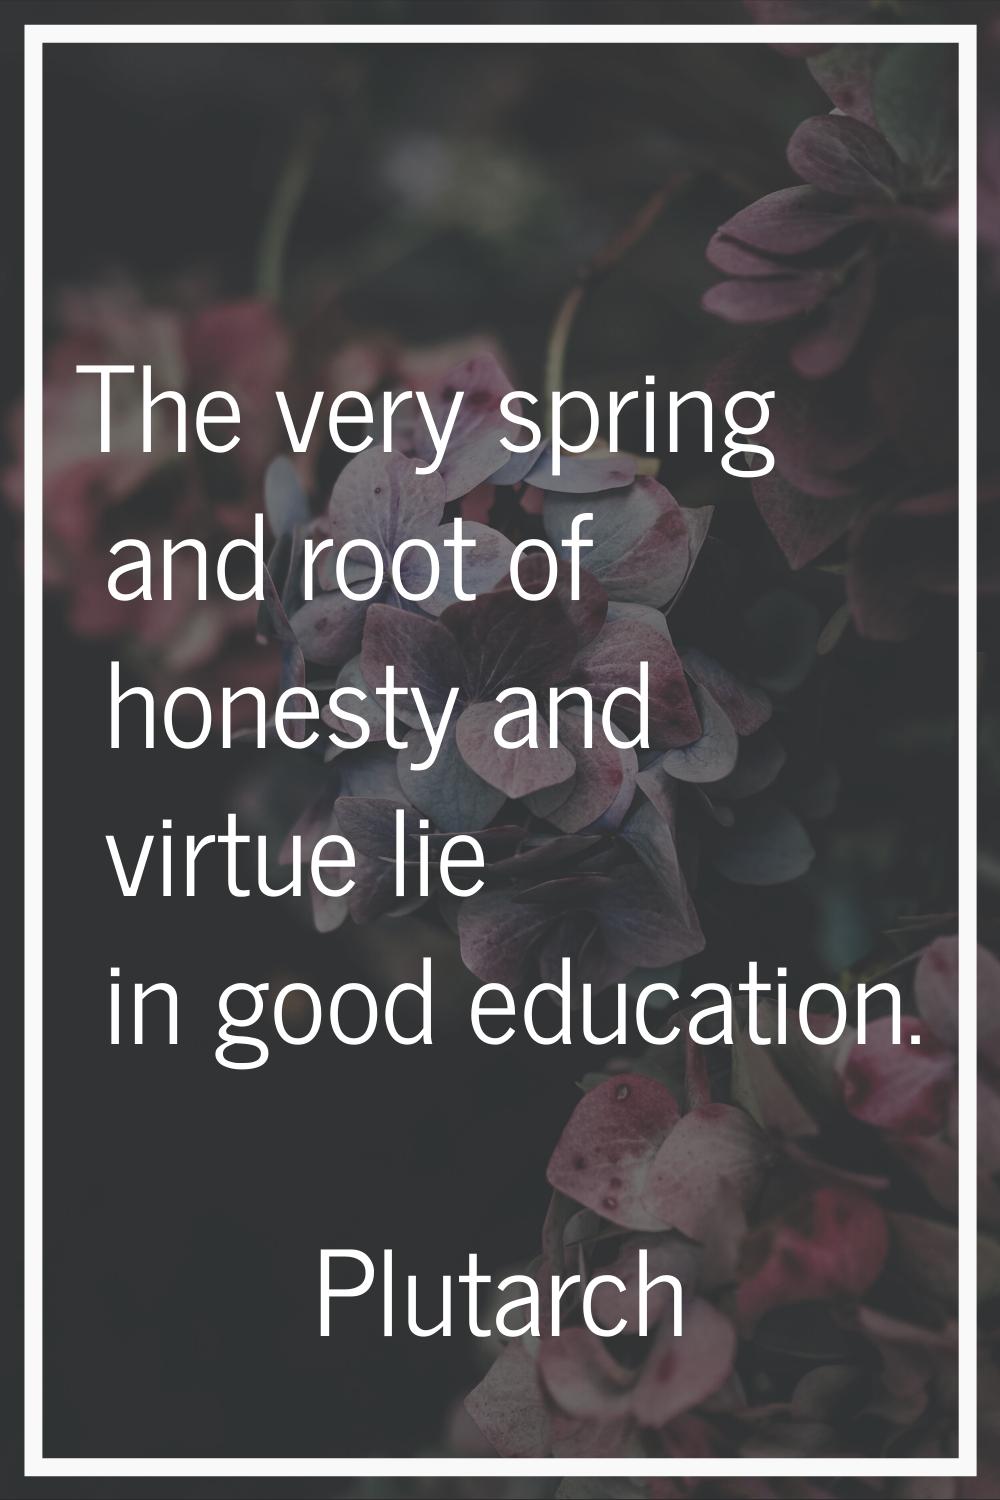 The very spring and root of honesty and virtue lie in good education.